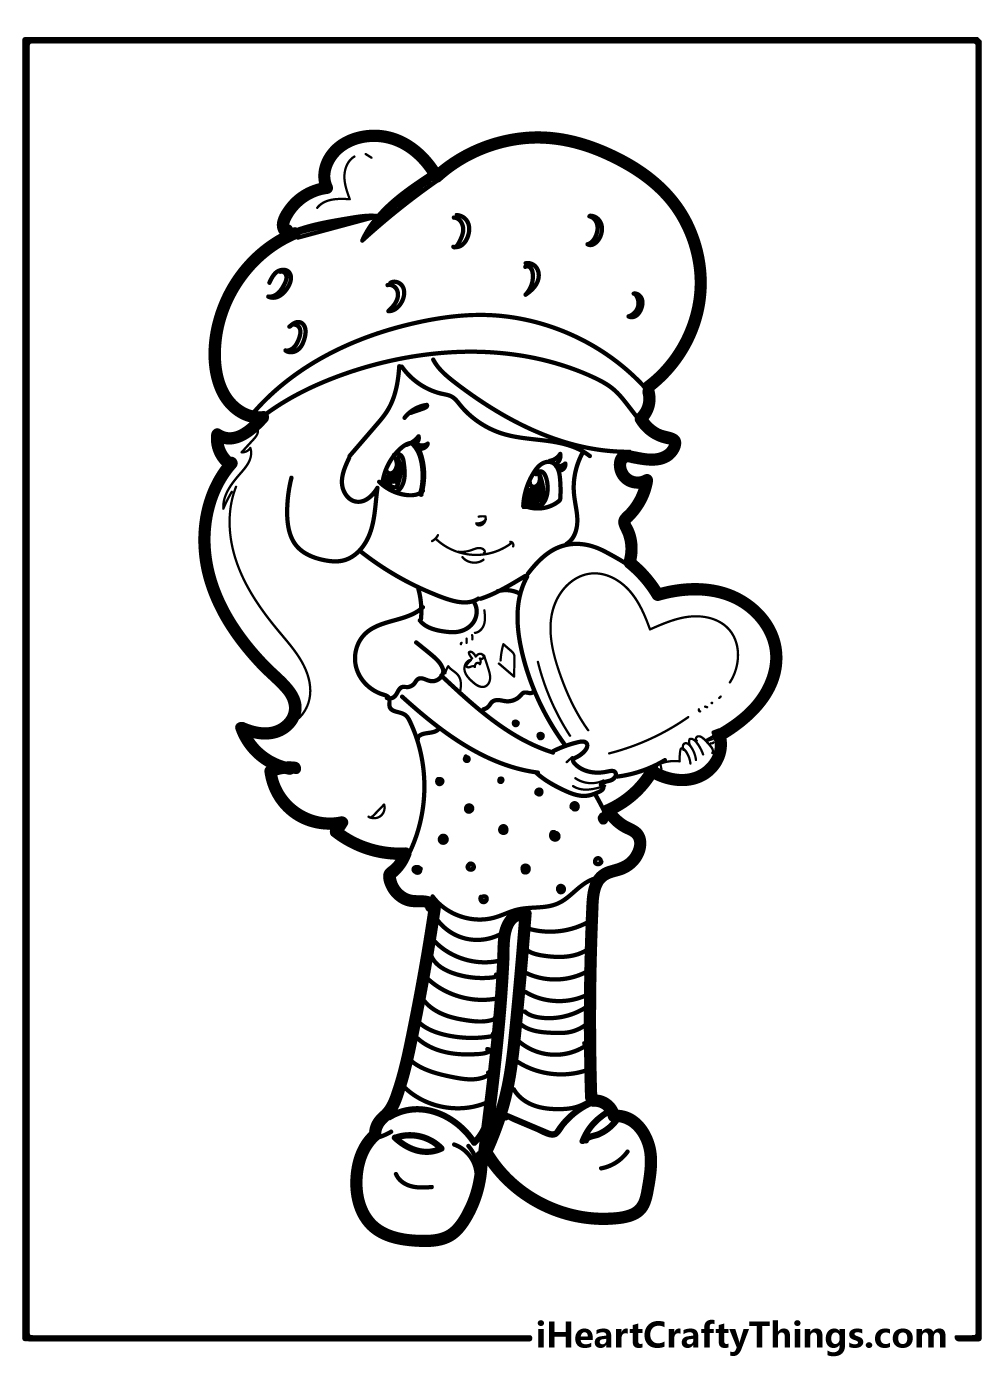 Strawberry Shortcake Coloring Book for adults free download